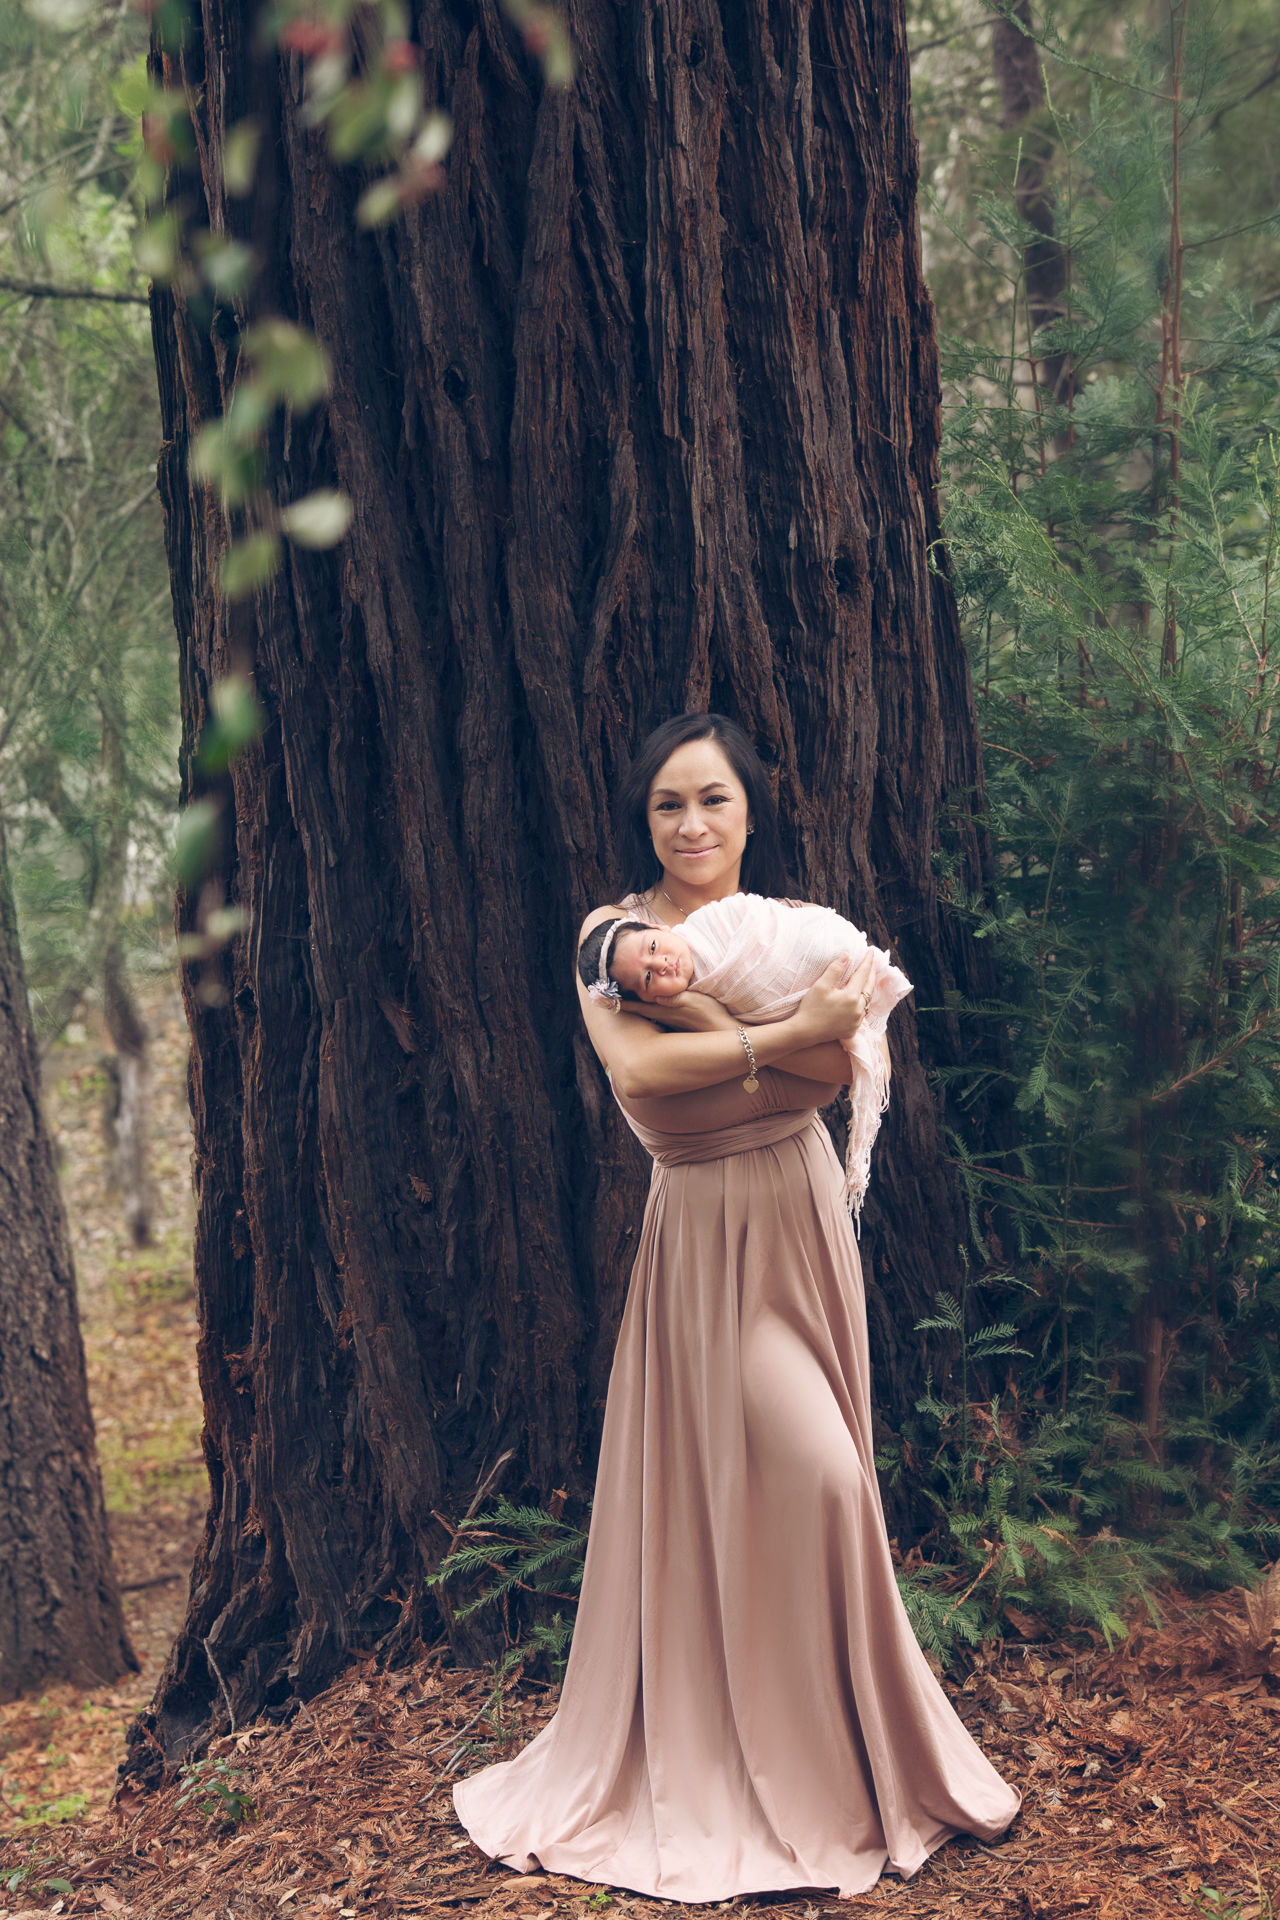 Mother posing outdoors with her newborn daughter. Wears pink dress.